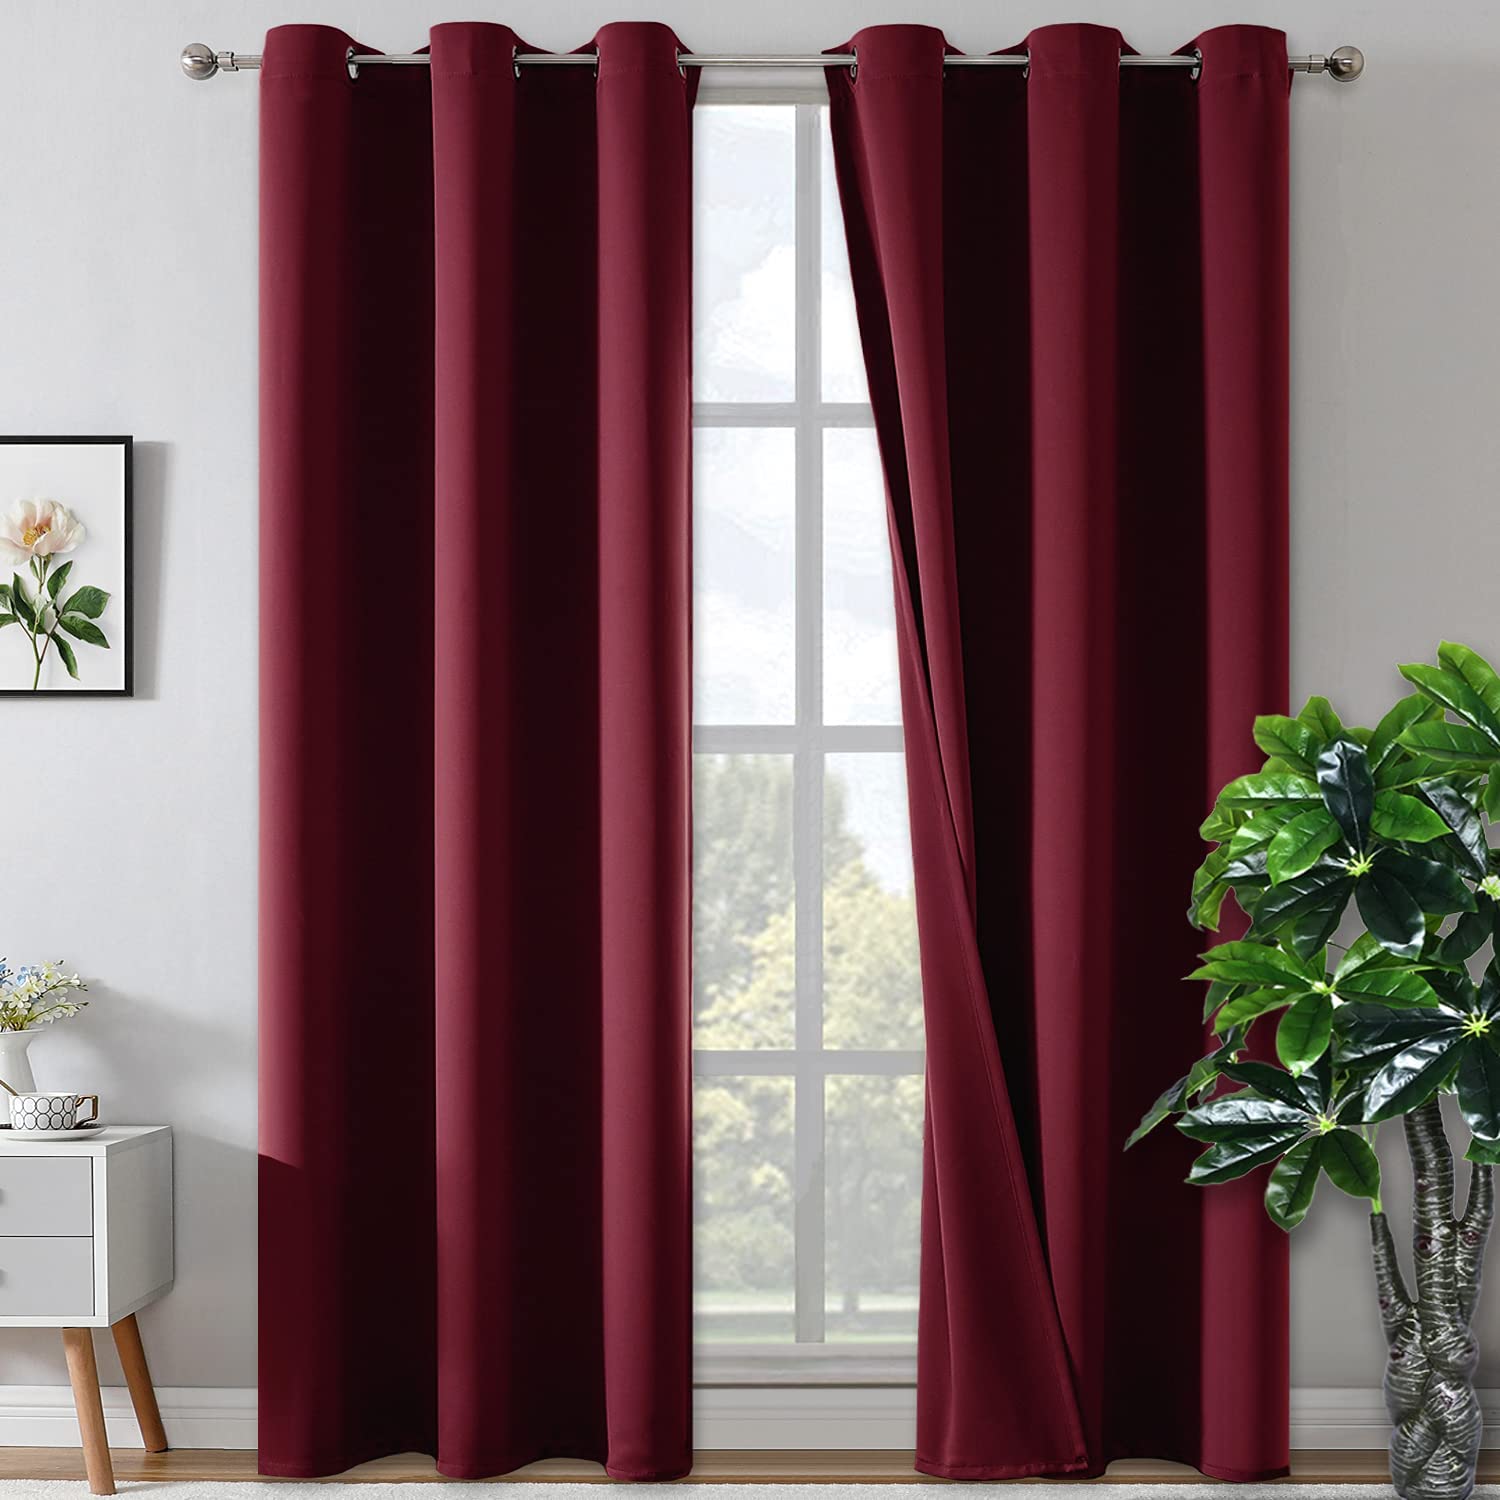 Rutterllow Easy Install Thermal Blackout Curtains